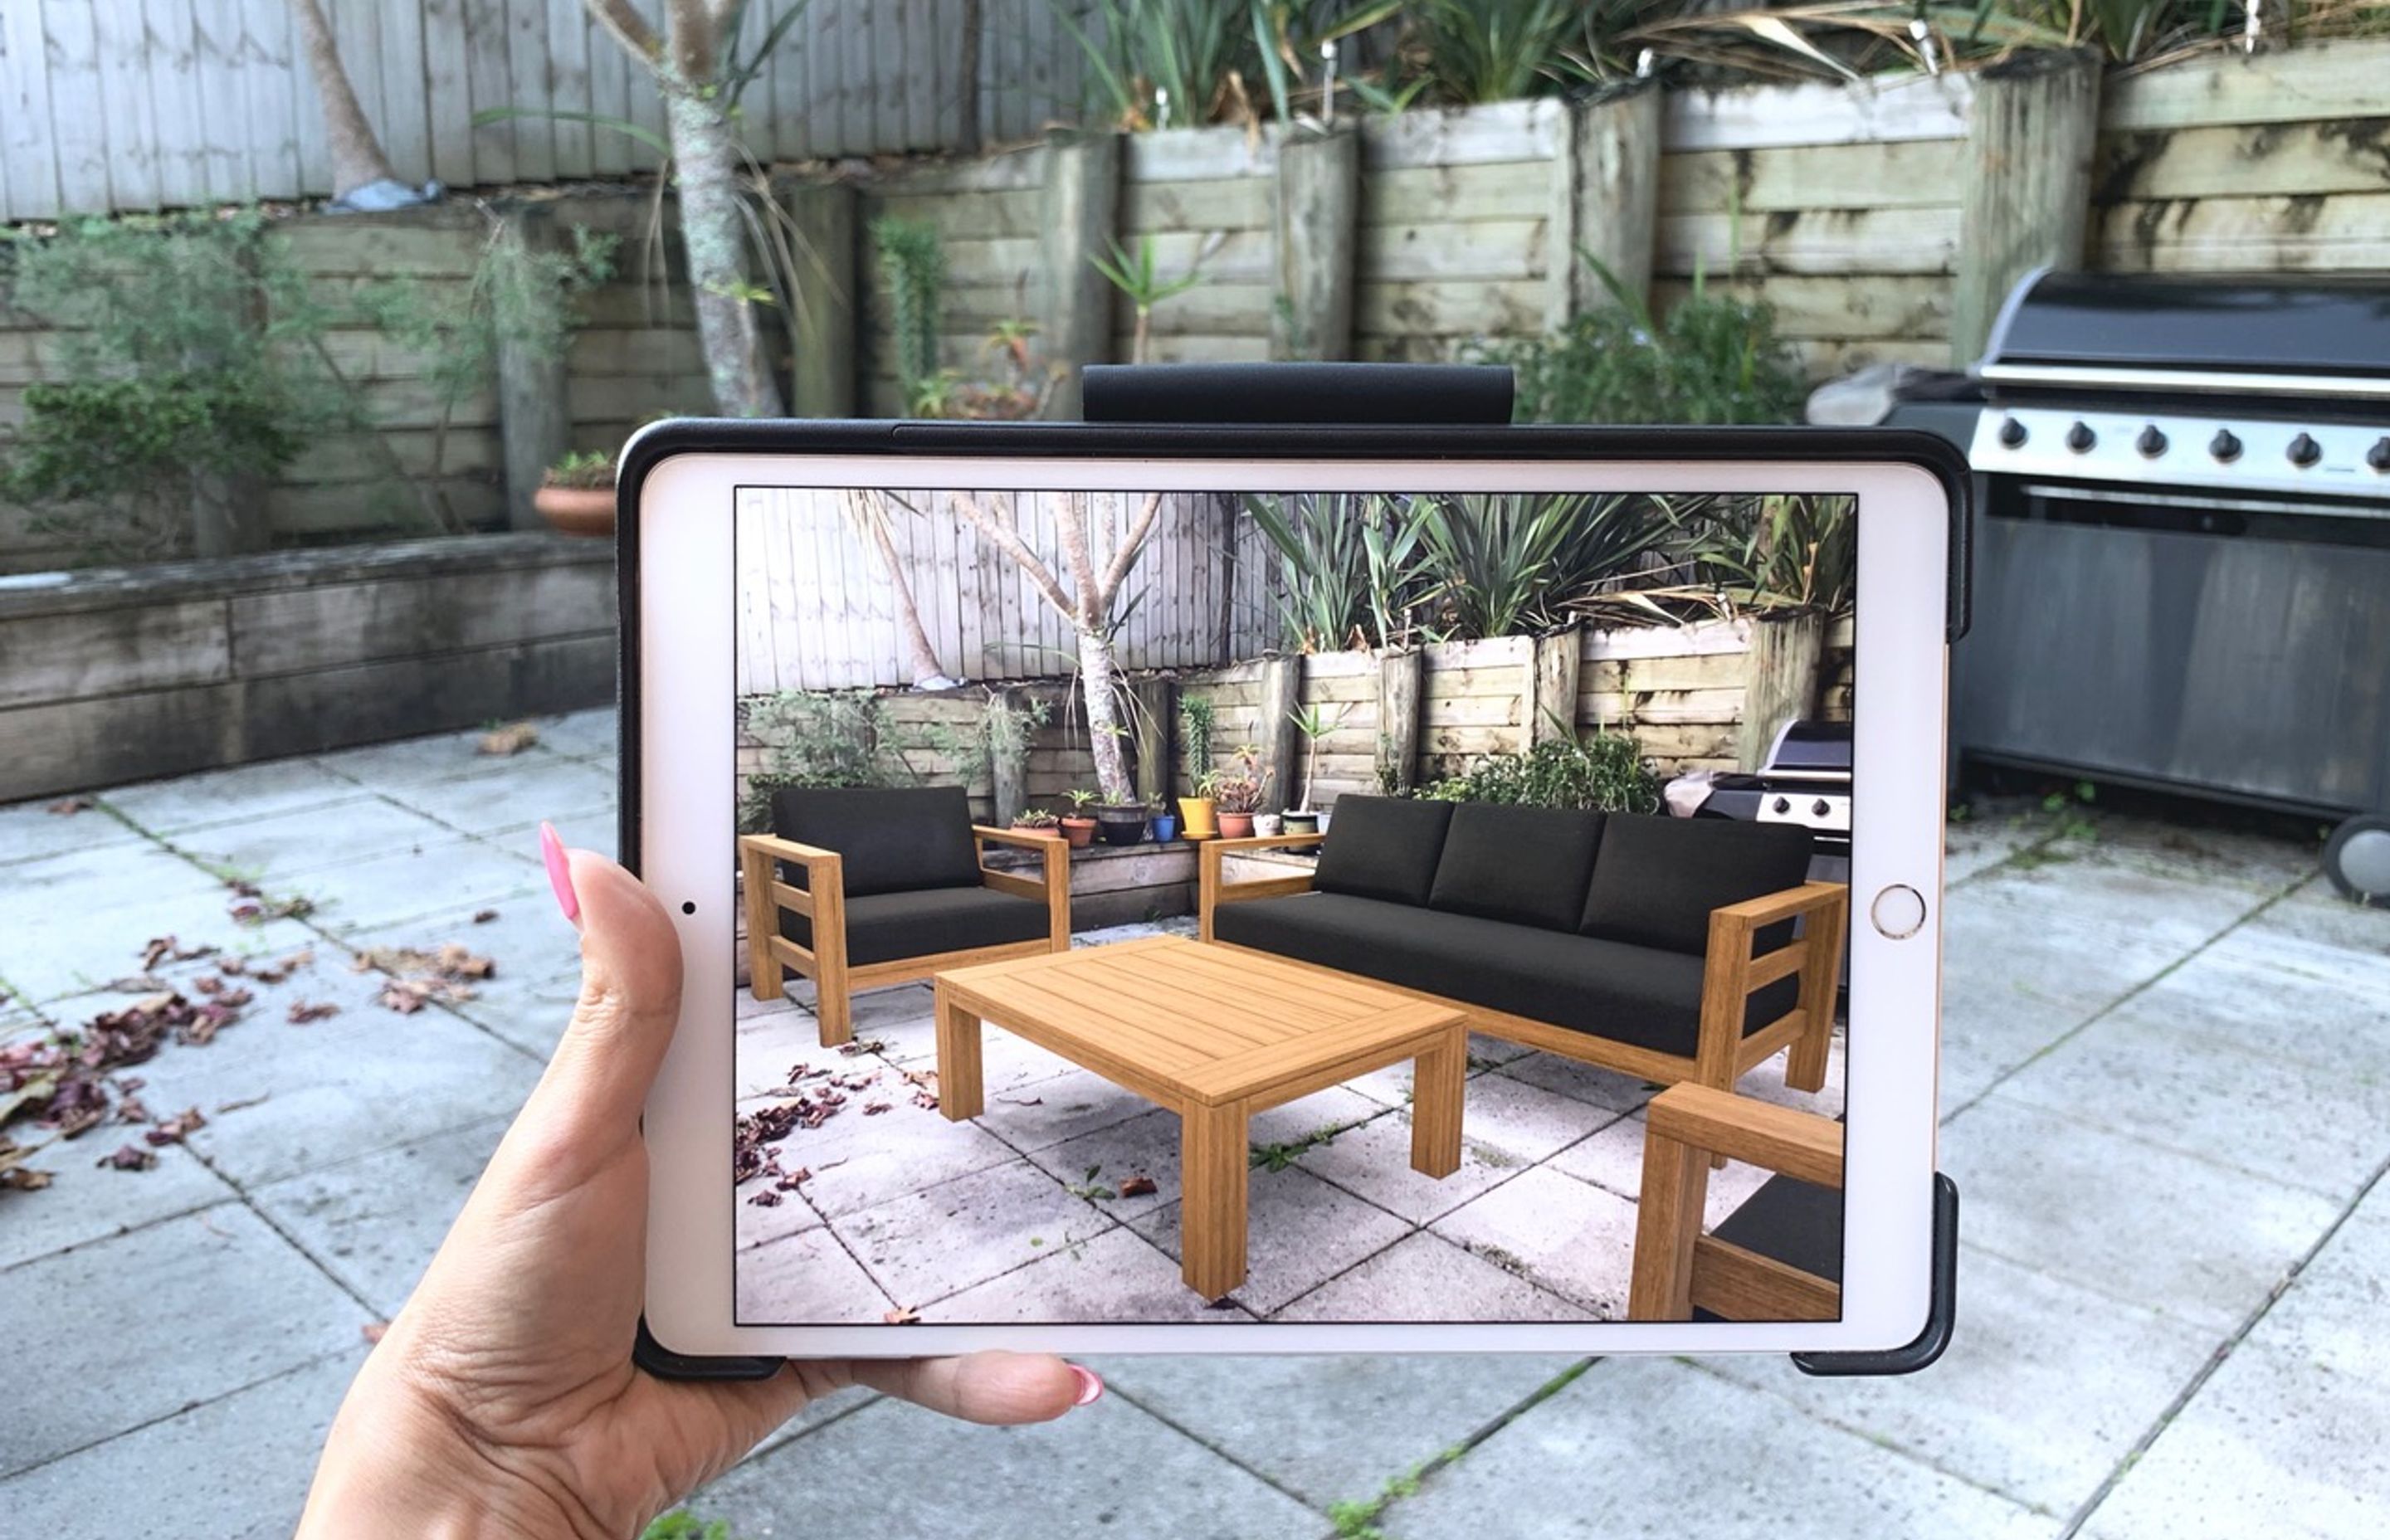 Once selected, the chosen outdoor setting downloads to the user's tablet or smartphone and can be positioned in the virtual site exactly how it would be set up to use.  Users can even walk around the setting to view it from multiple angles.